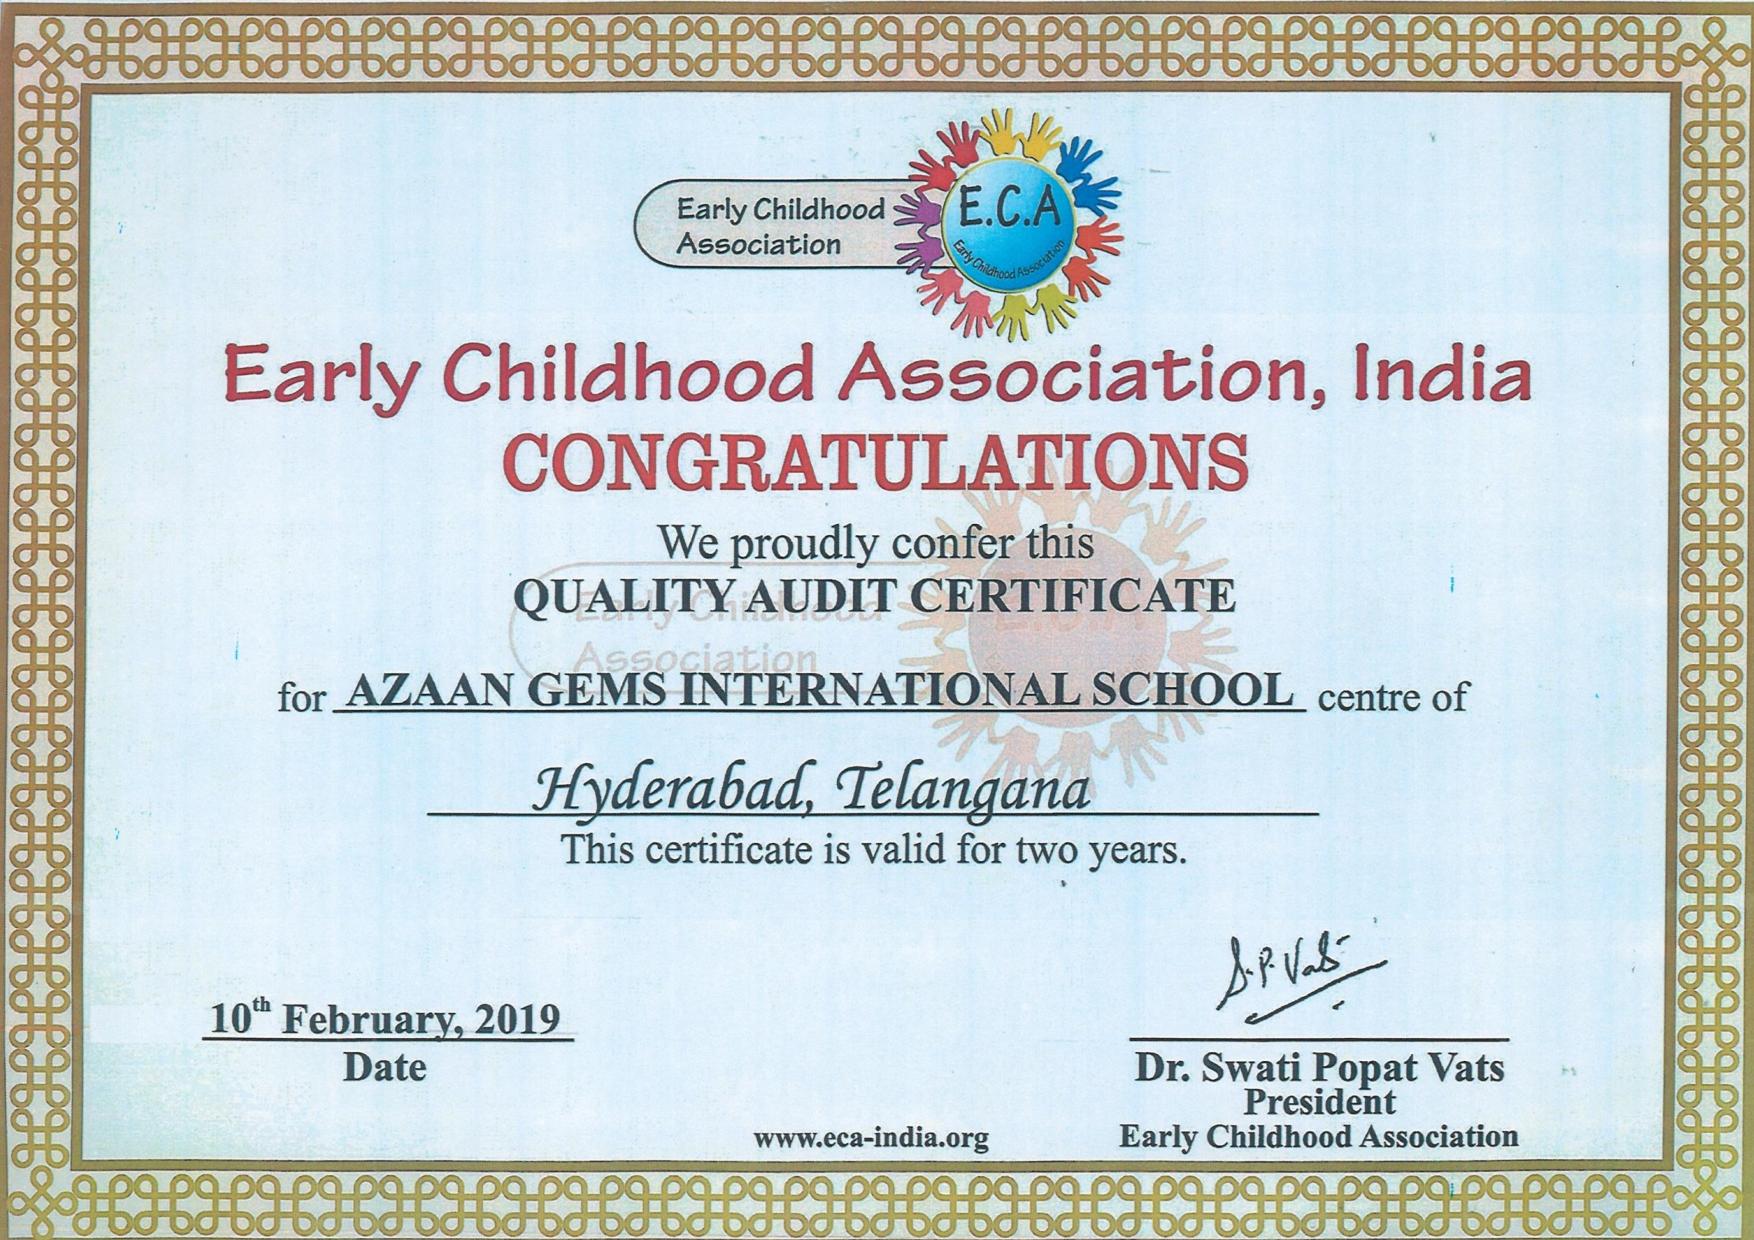 Quality Audit Certificate from Early Childhood Association